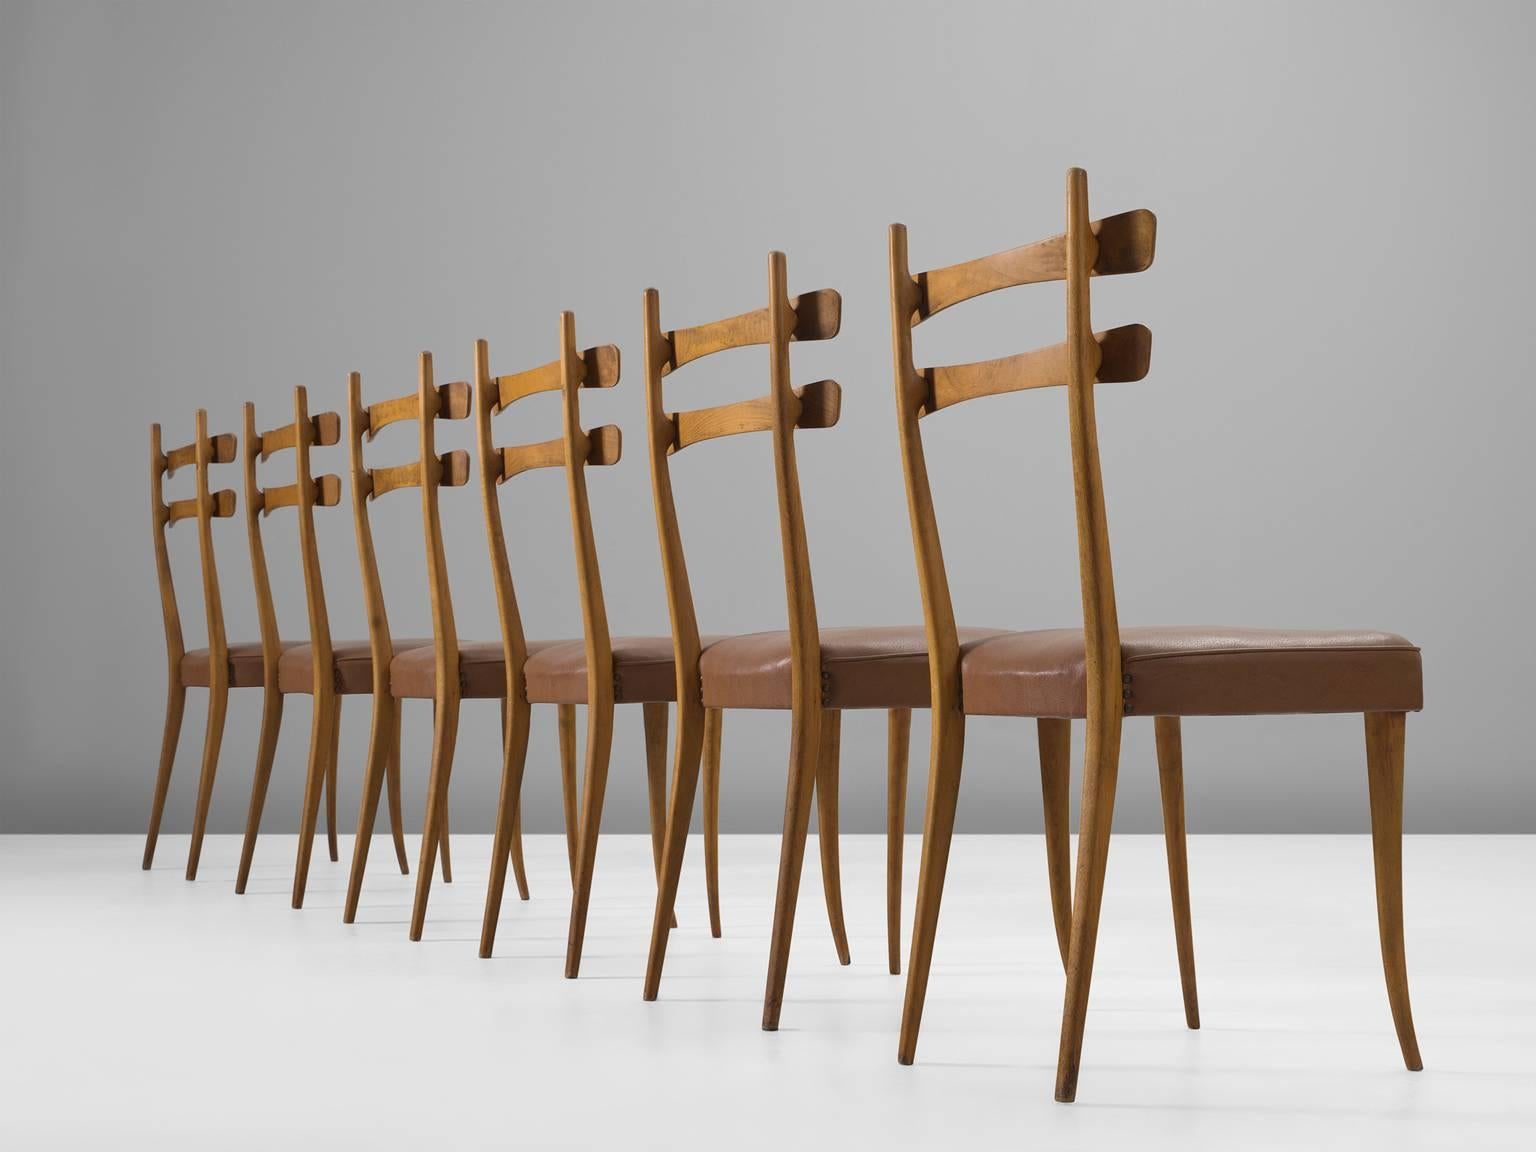 Set of dining chairs in oak and leather, Italy, 1940s. 

These Italian chairs are both minimal and playful due to the double beamed seat back. The slender legs taper towards the bottom. The airy dimensions and forms are misleading, each chair